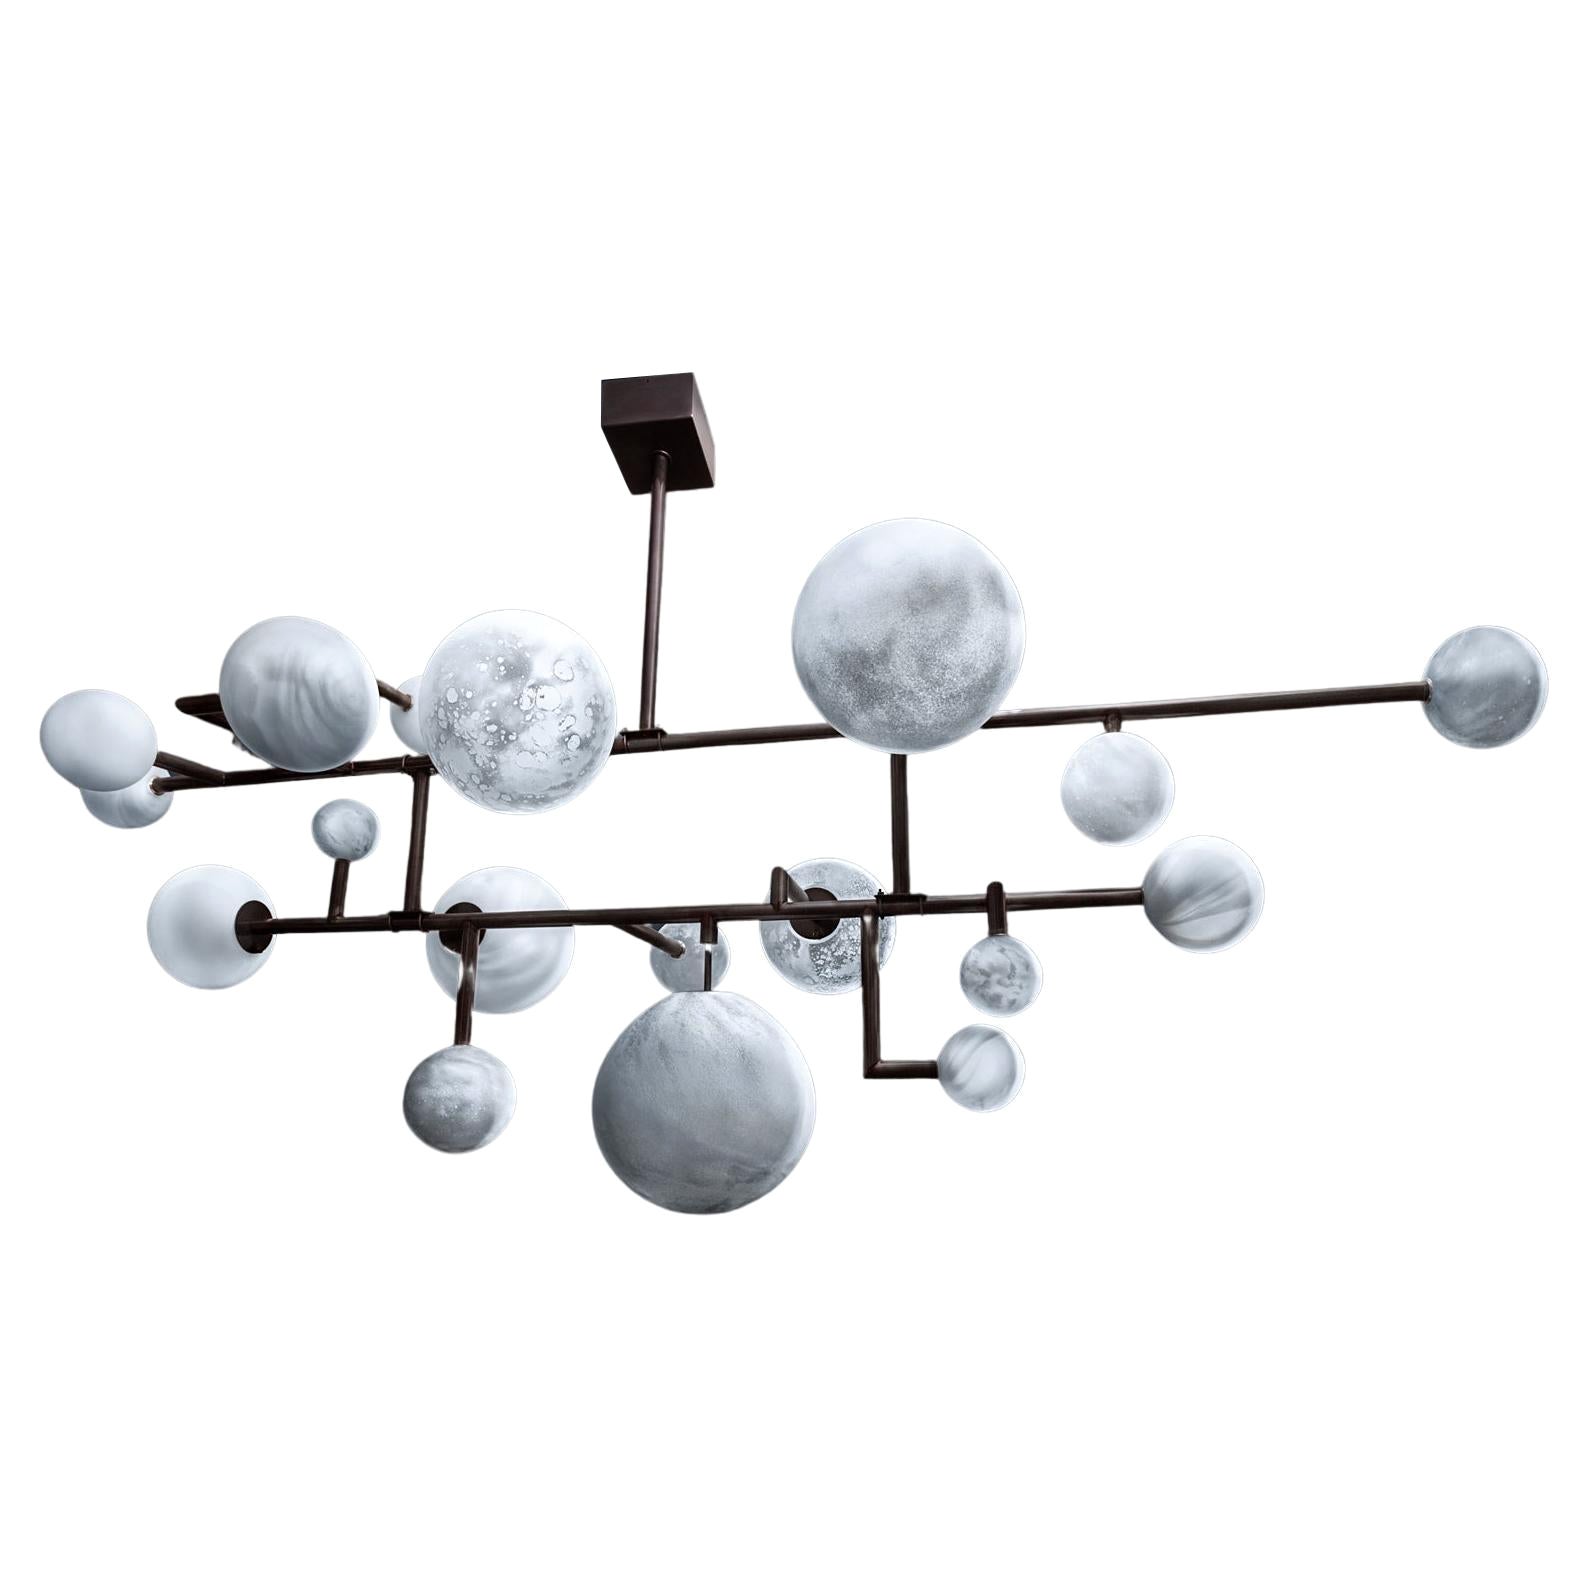 Balanced Planets Chandelier by Ludovic Clément D'armont For Sale